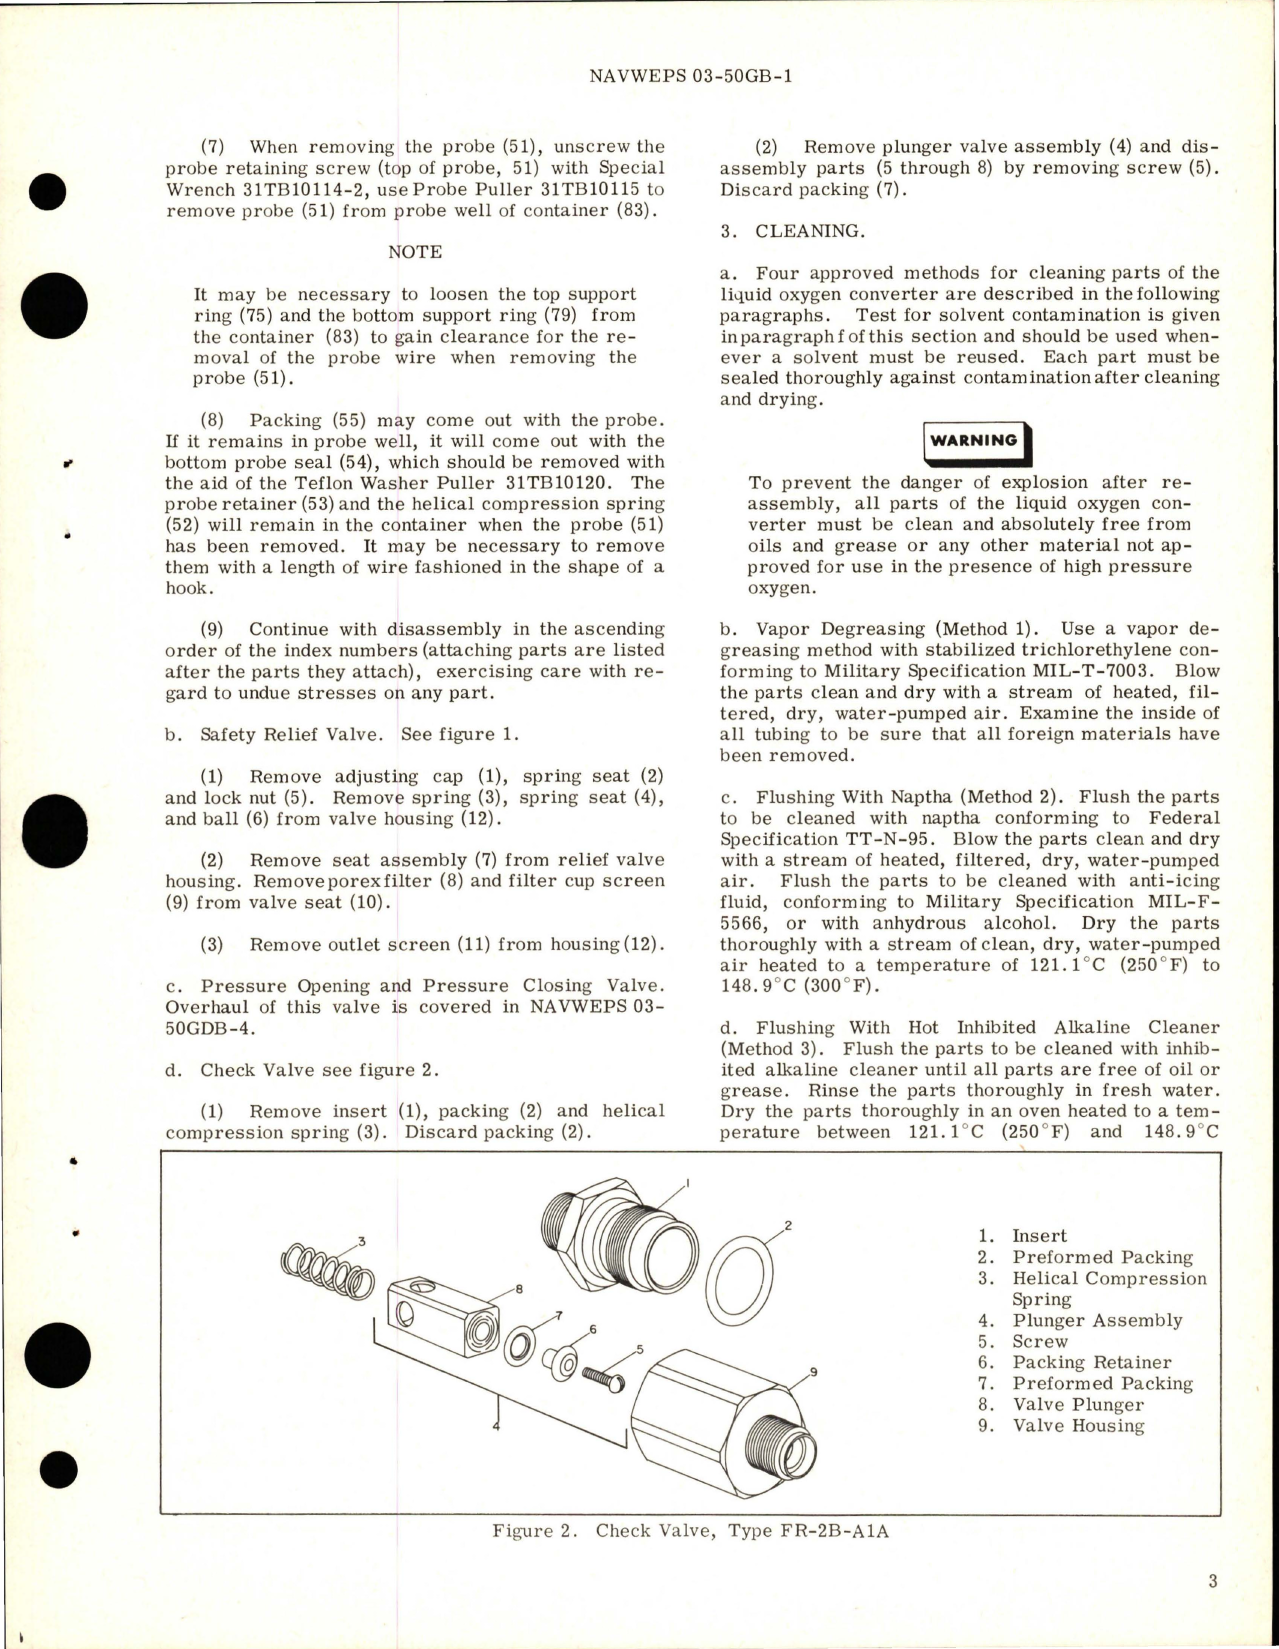 Sample page 5 from AirCorps Library document: Overhaul Instructions with Illustrated Parts Breakdown for Liquid Oxygen Converter - Part 29047-1-A1